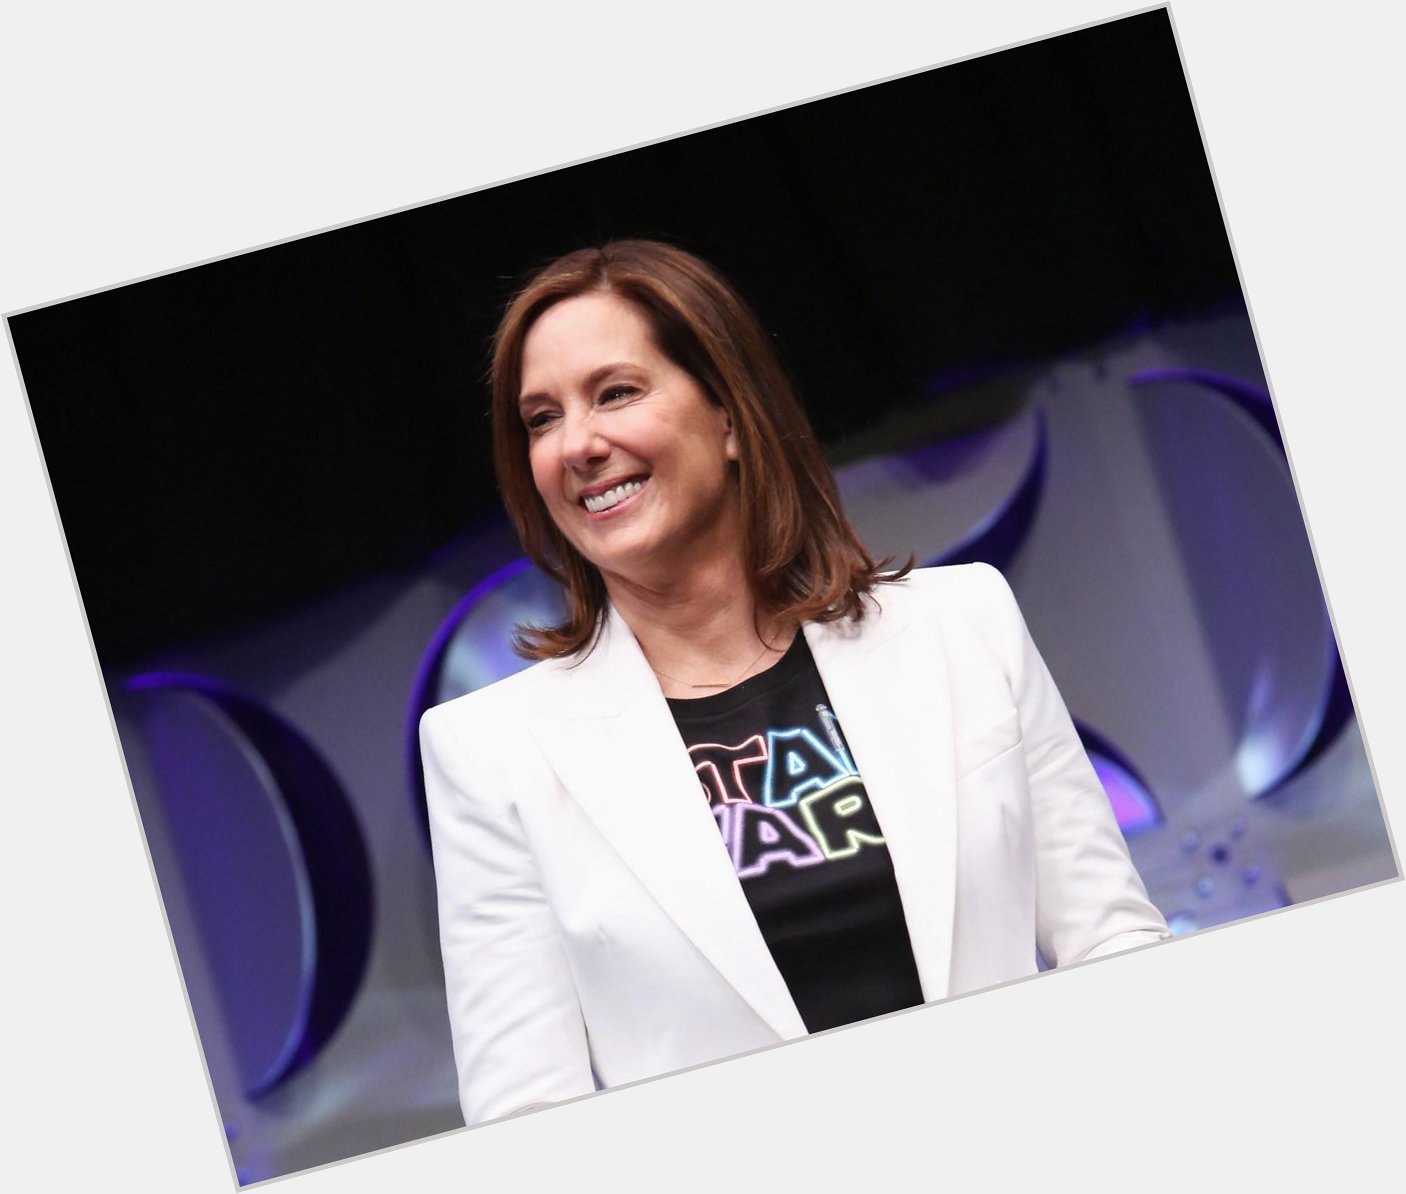 Execute Birthday 66! Happy 66th Birthday to one of the greatest movie producers of all time, Kathleen Kennedy! 